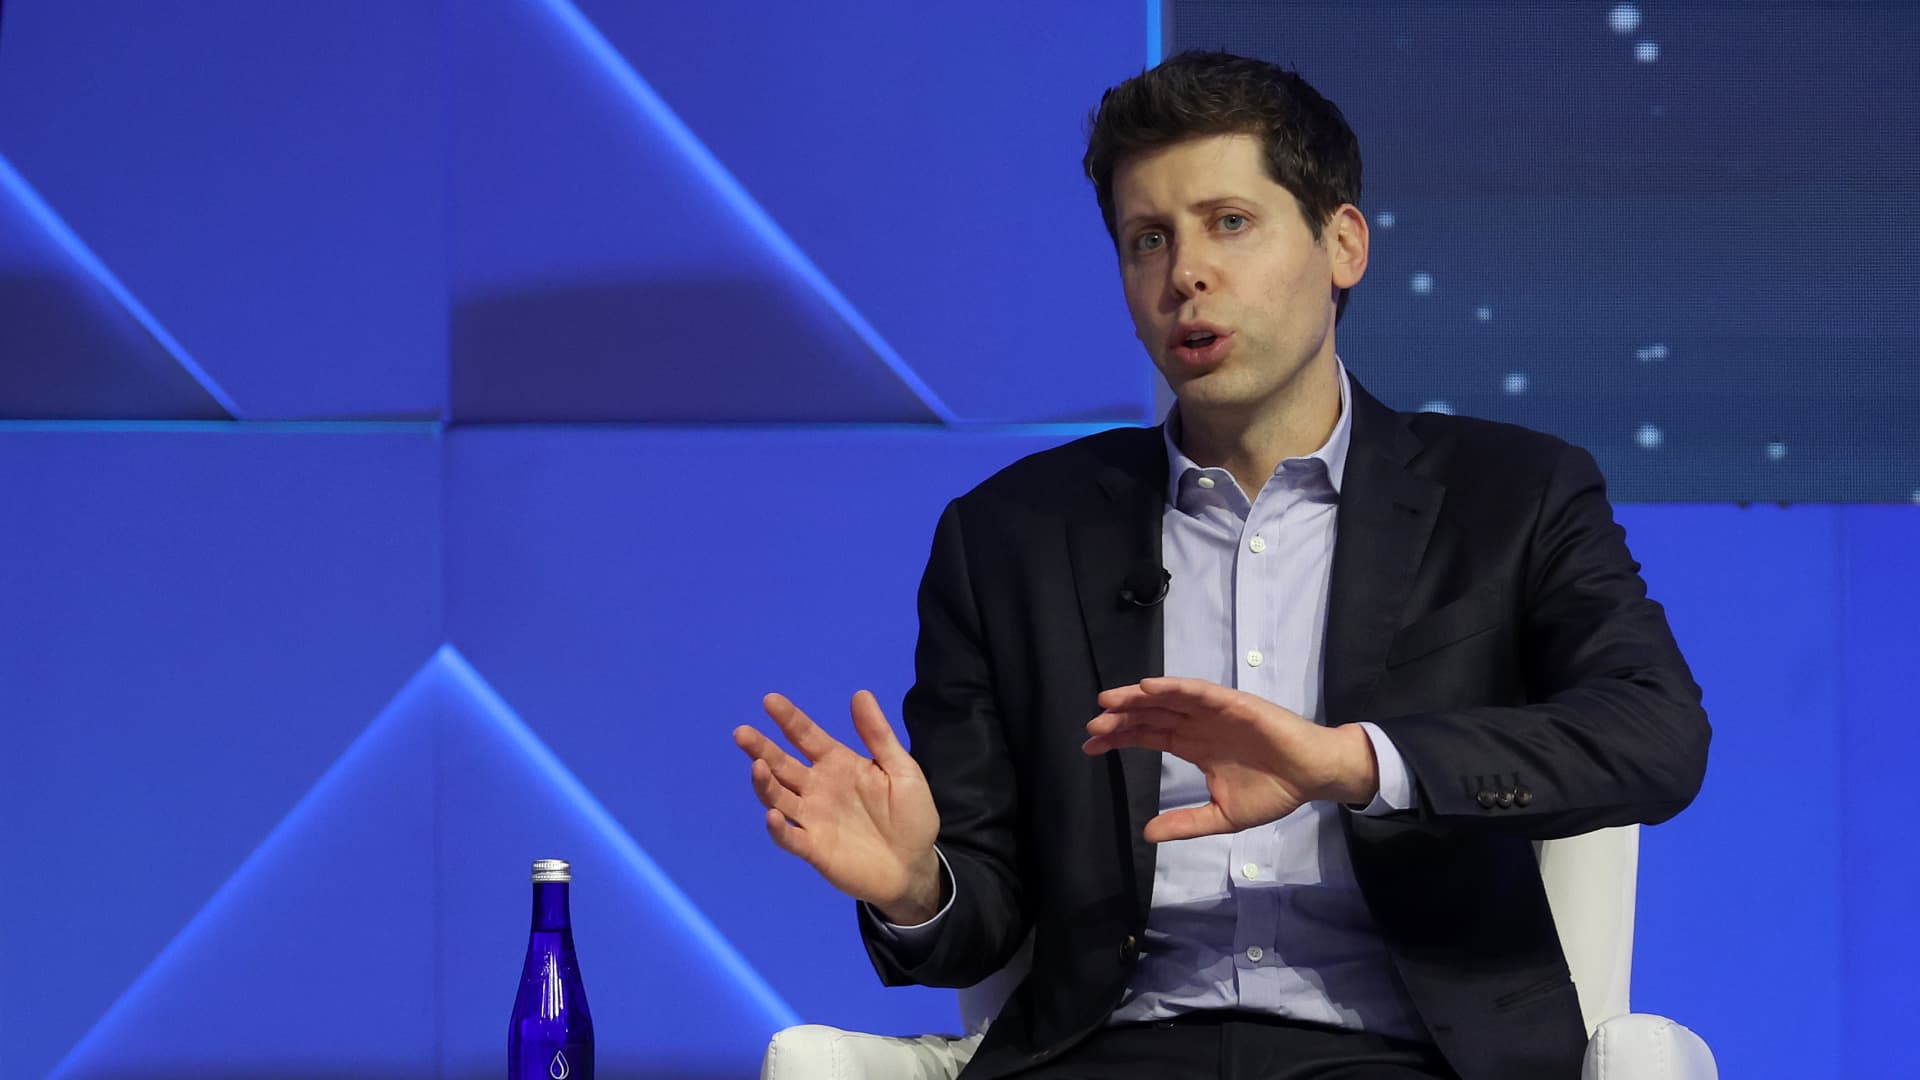 OpenAI's Sam Altman exits as CEO because 'board no longer has confidence' in ability to lead